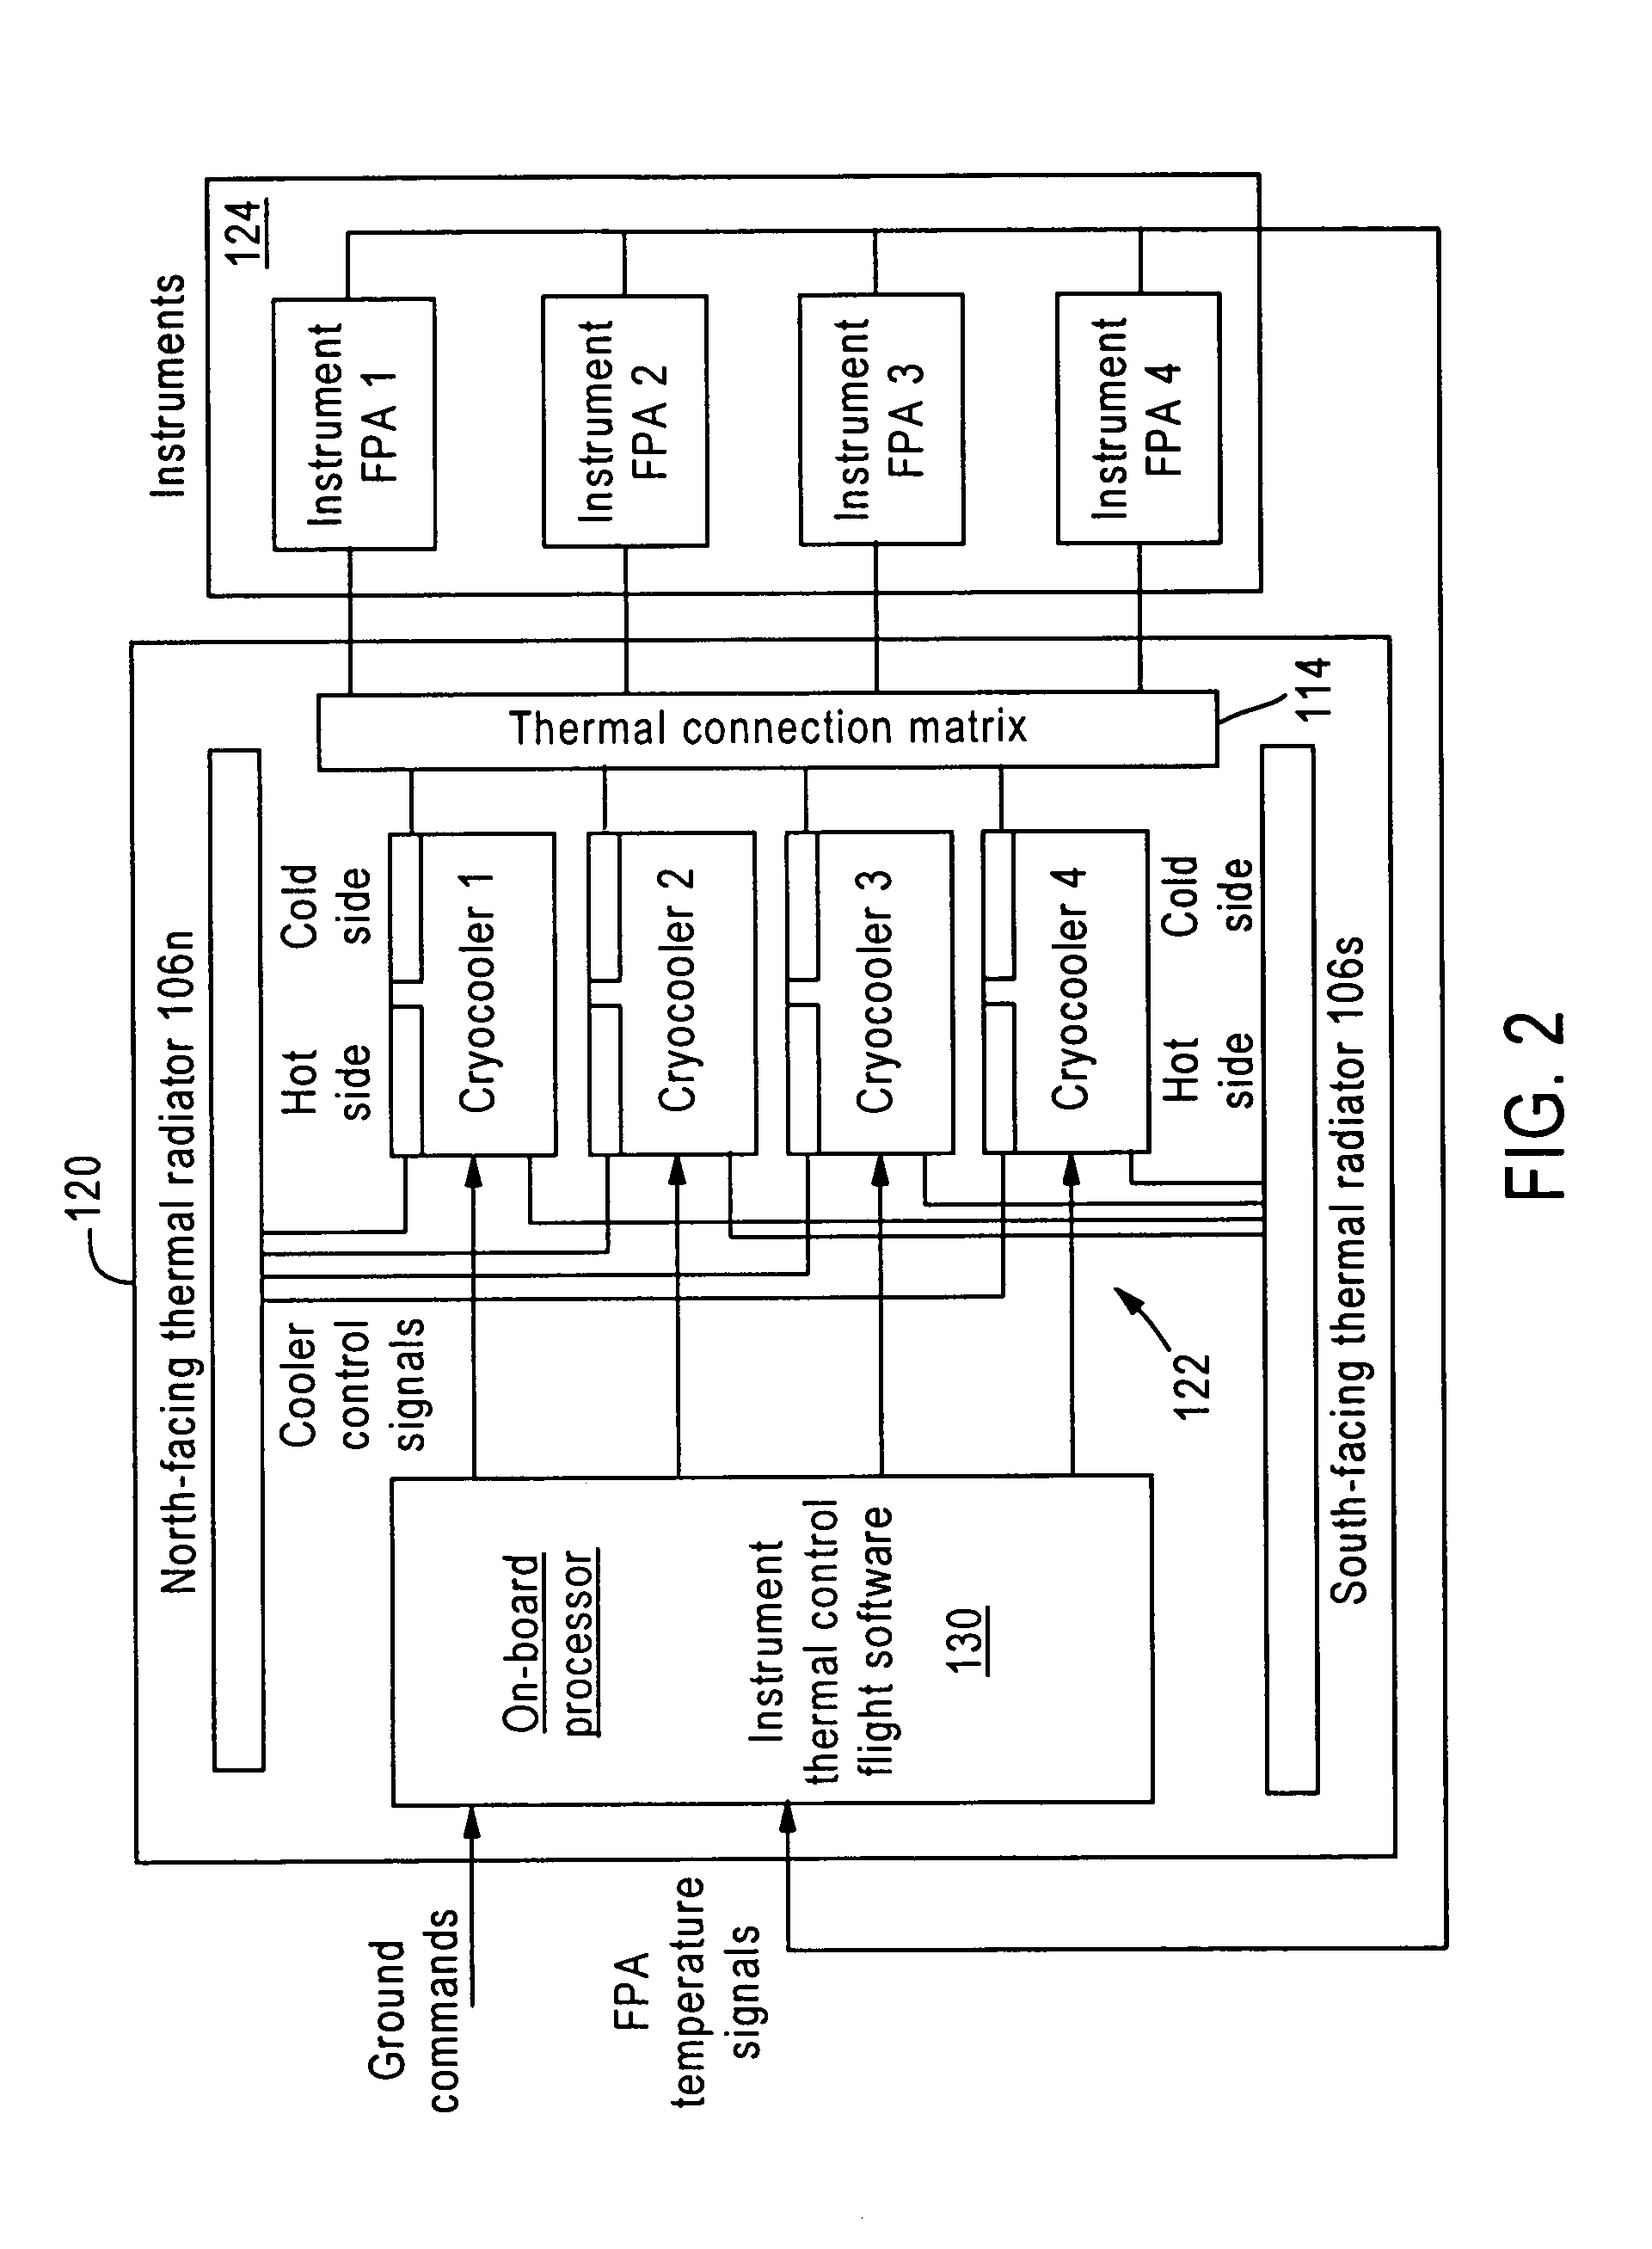 Scalable thermal control system for spacecraft mounted instrumentation